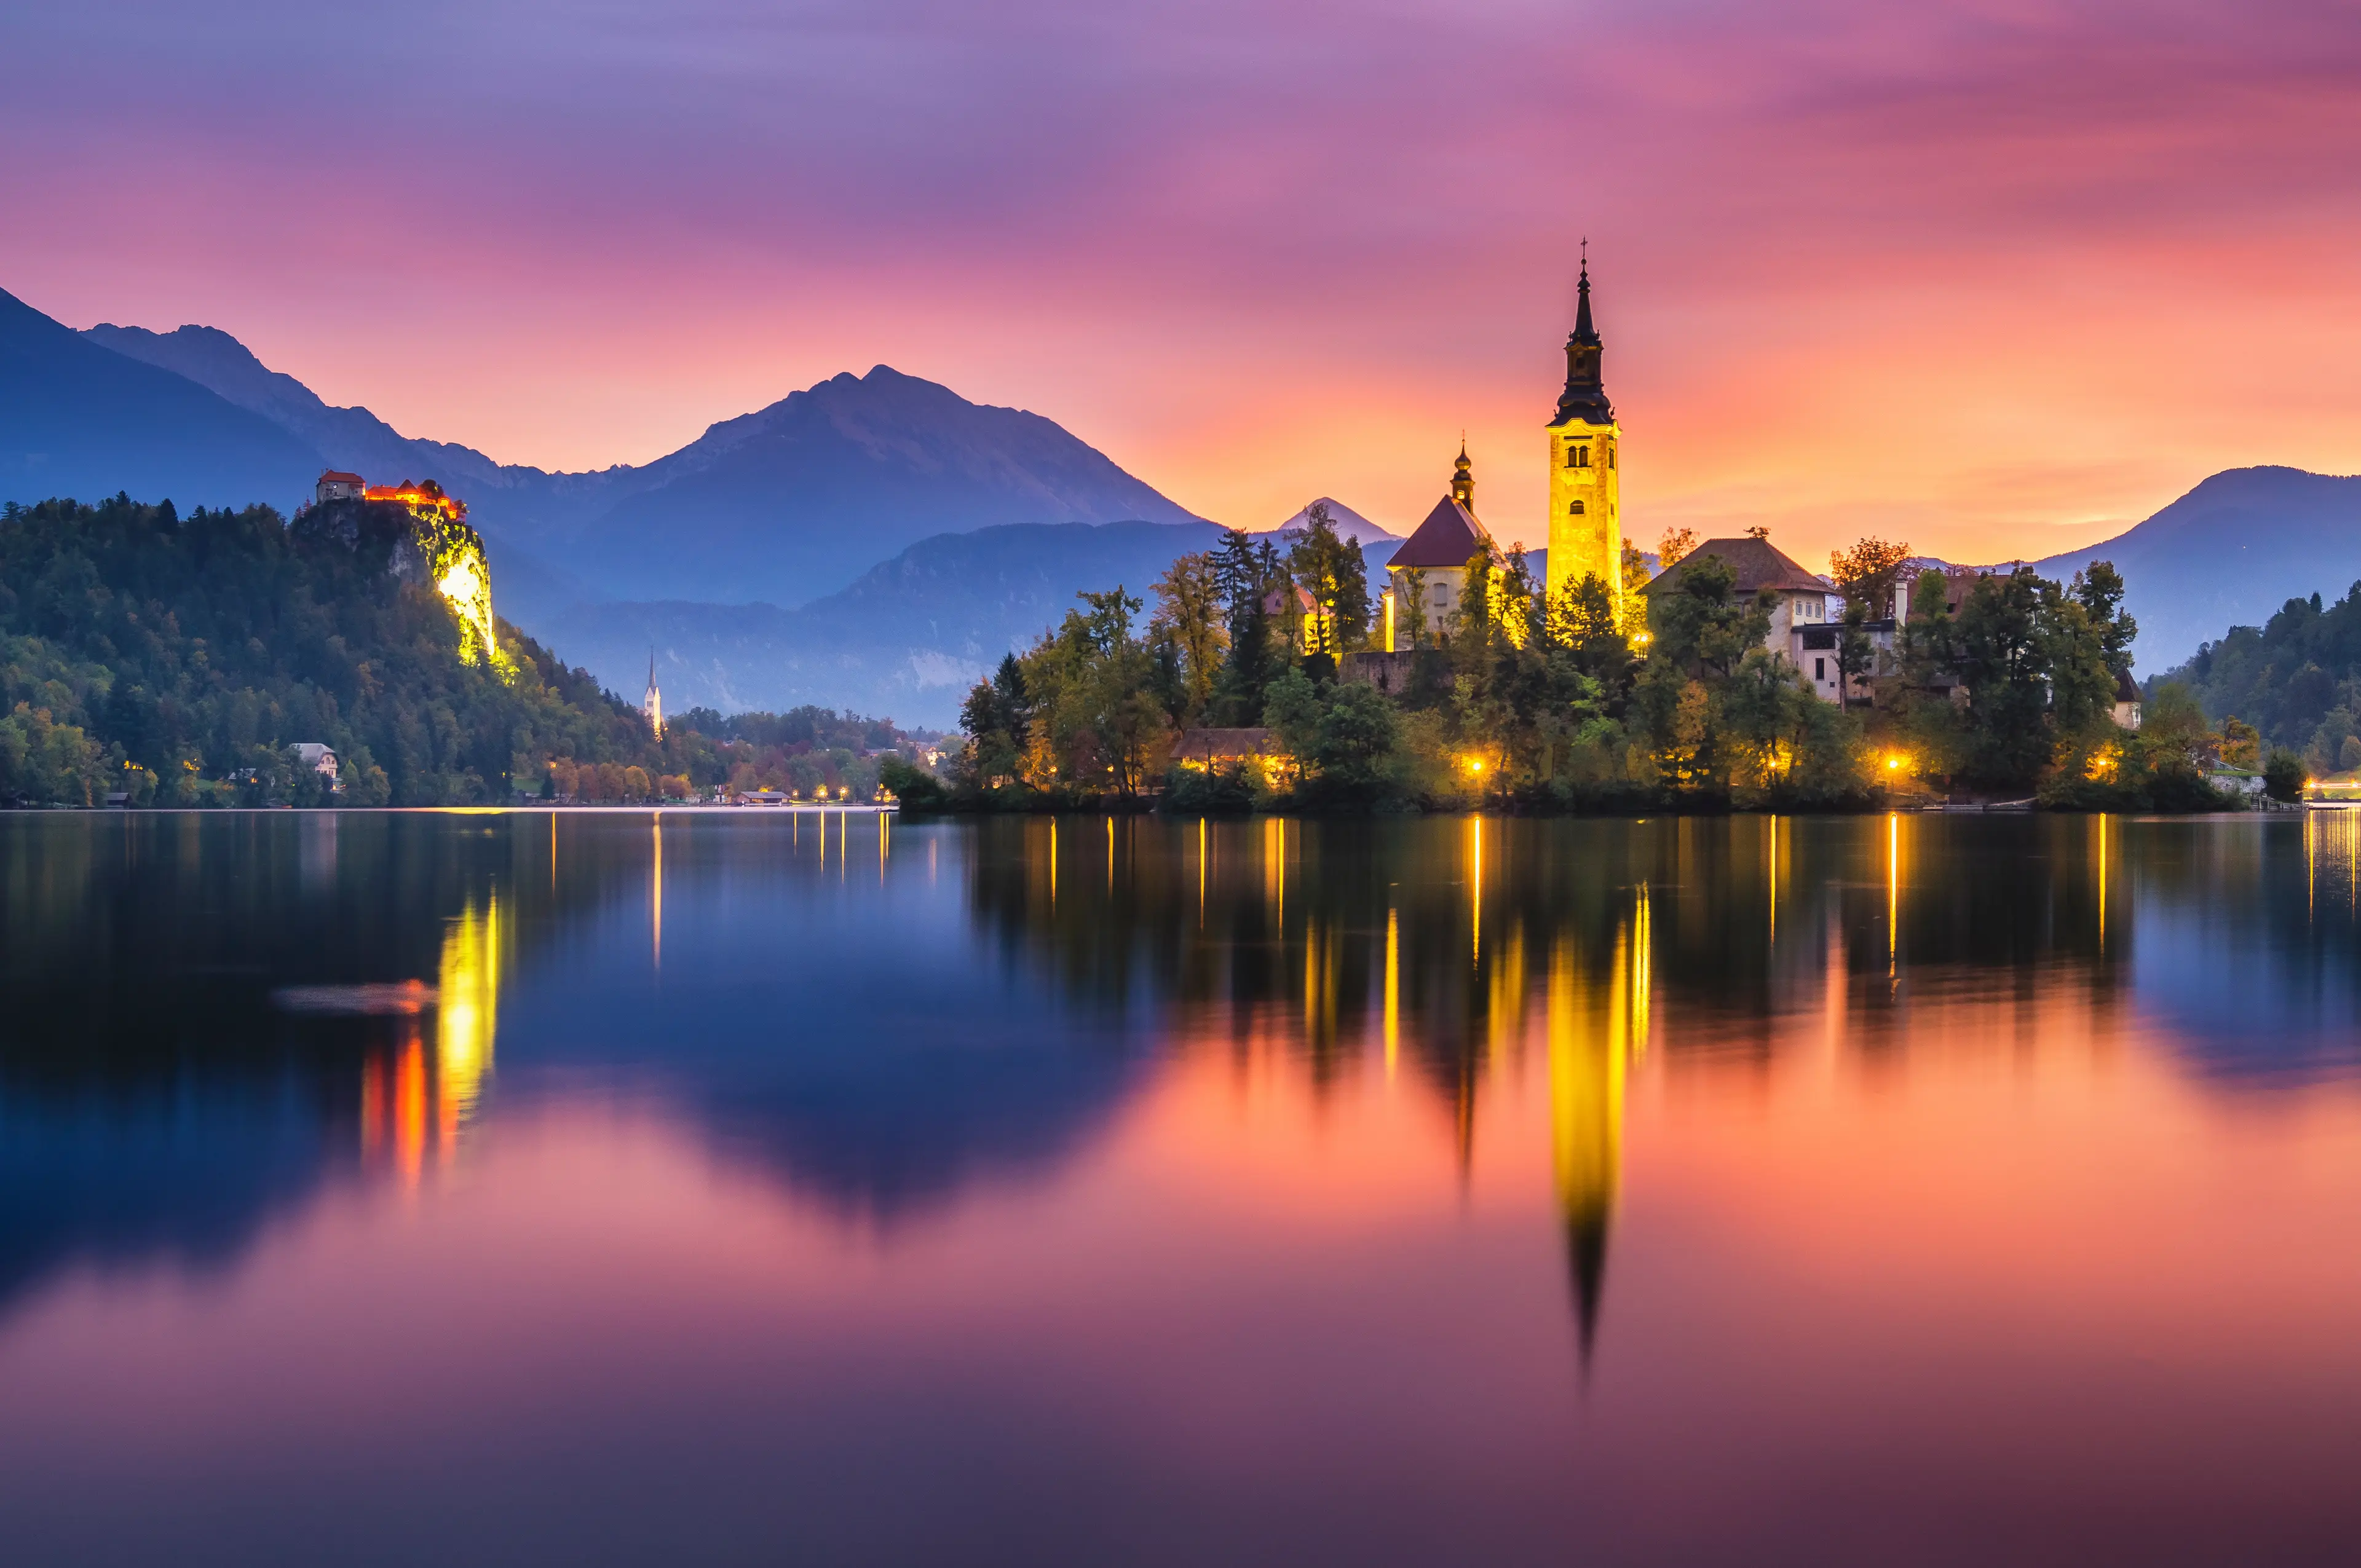 2-Day Solo Adventure & Relaxation Itinerary for Lake Bled, Slovenia